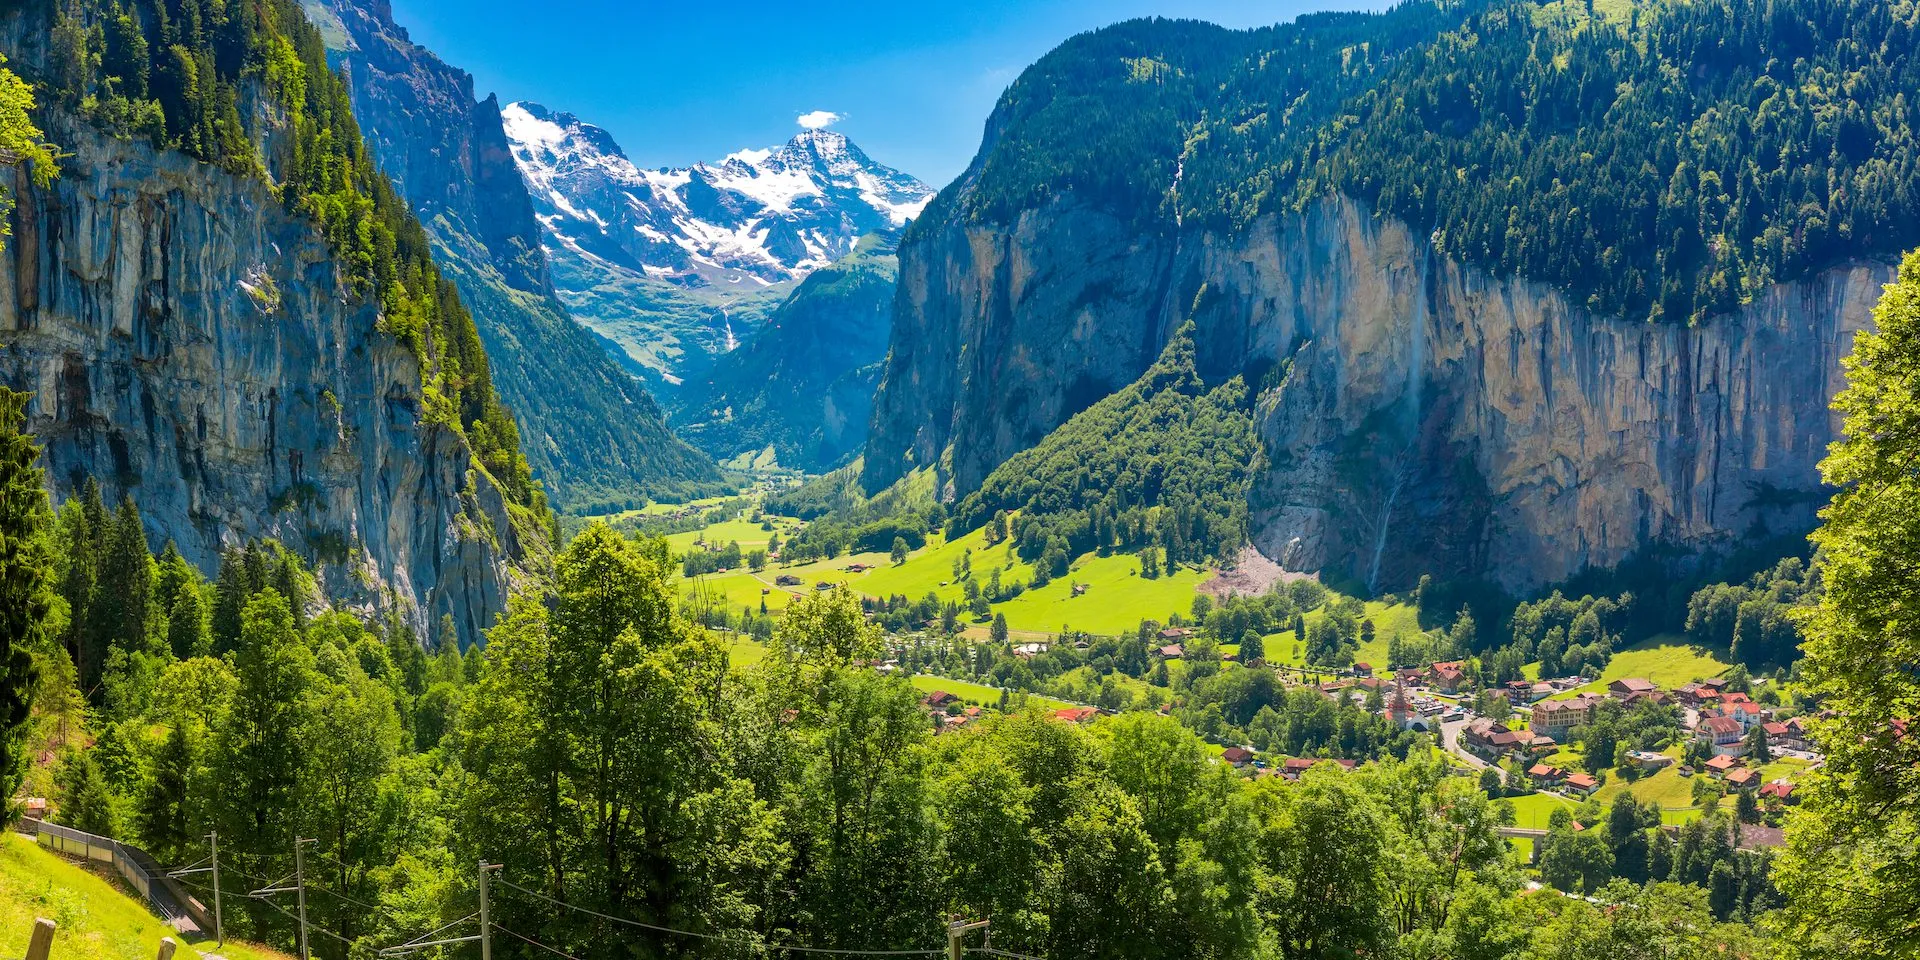 The view of lauterbrunnen valley and its impressive cliffs